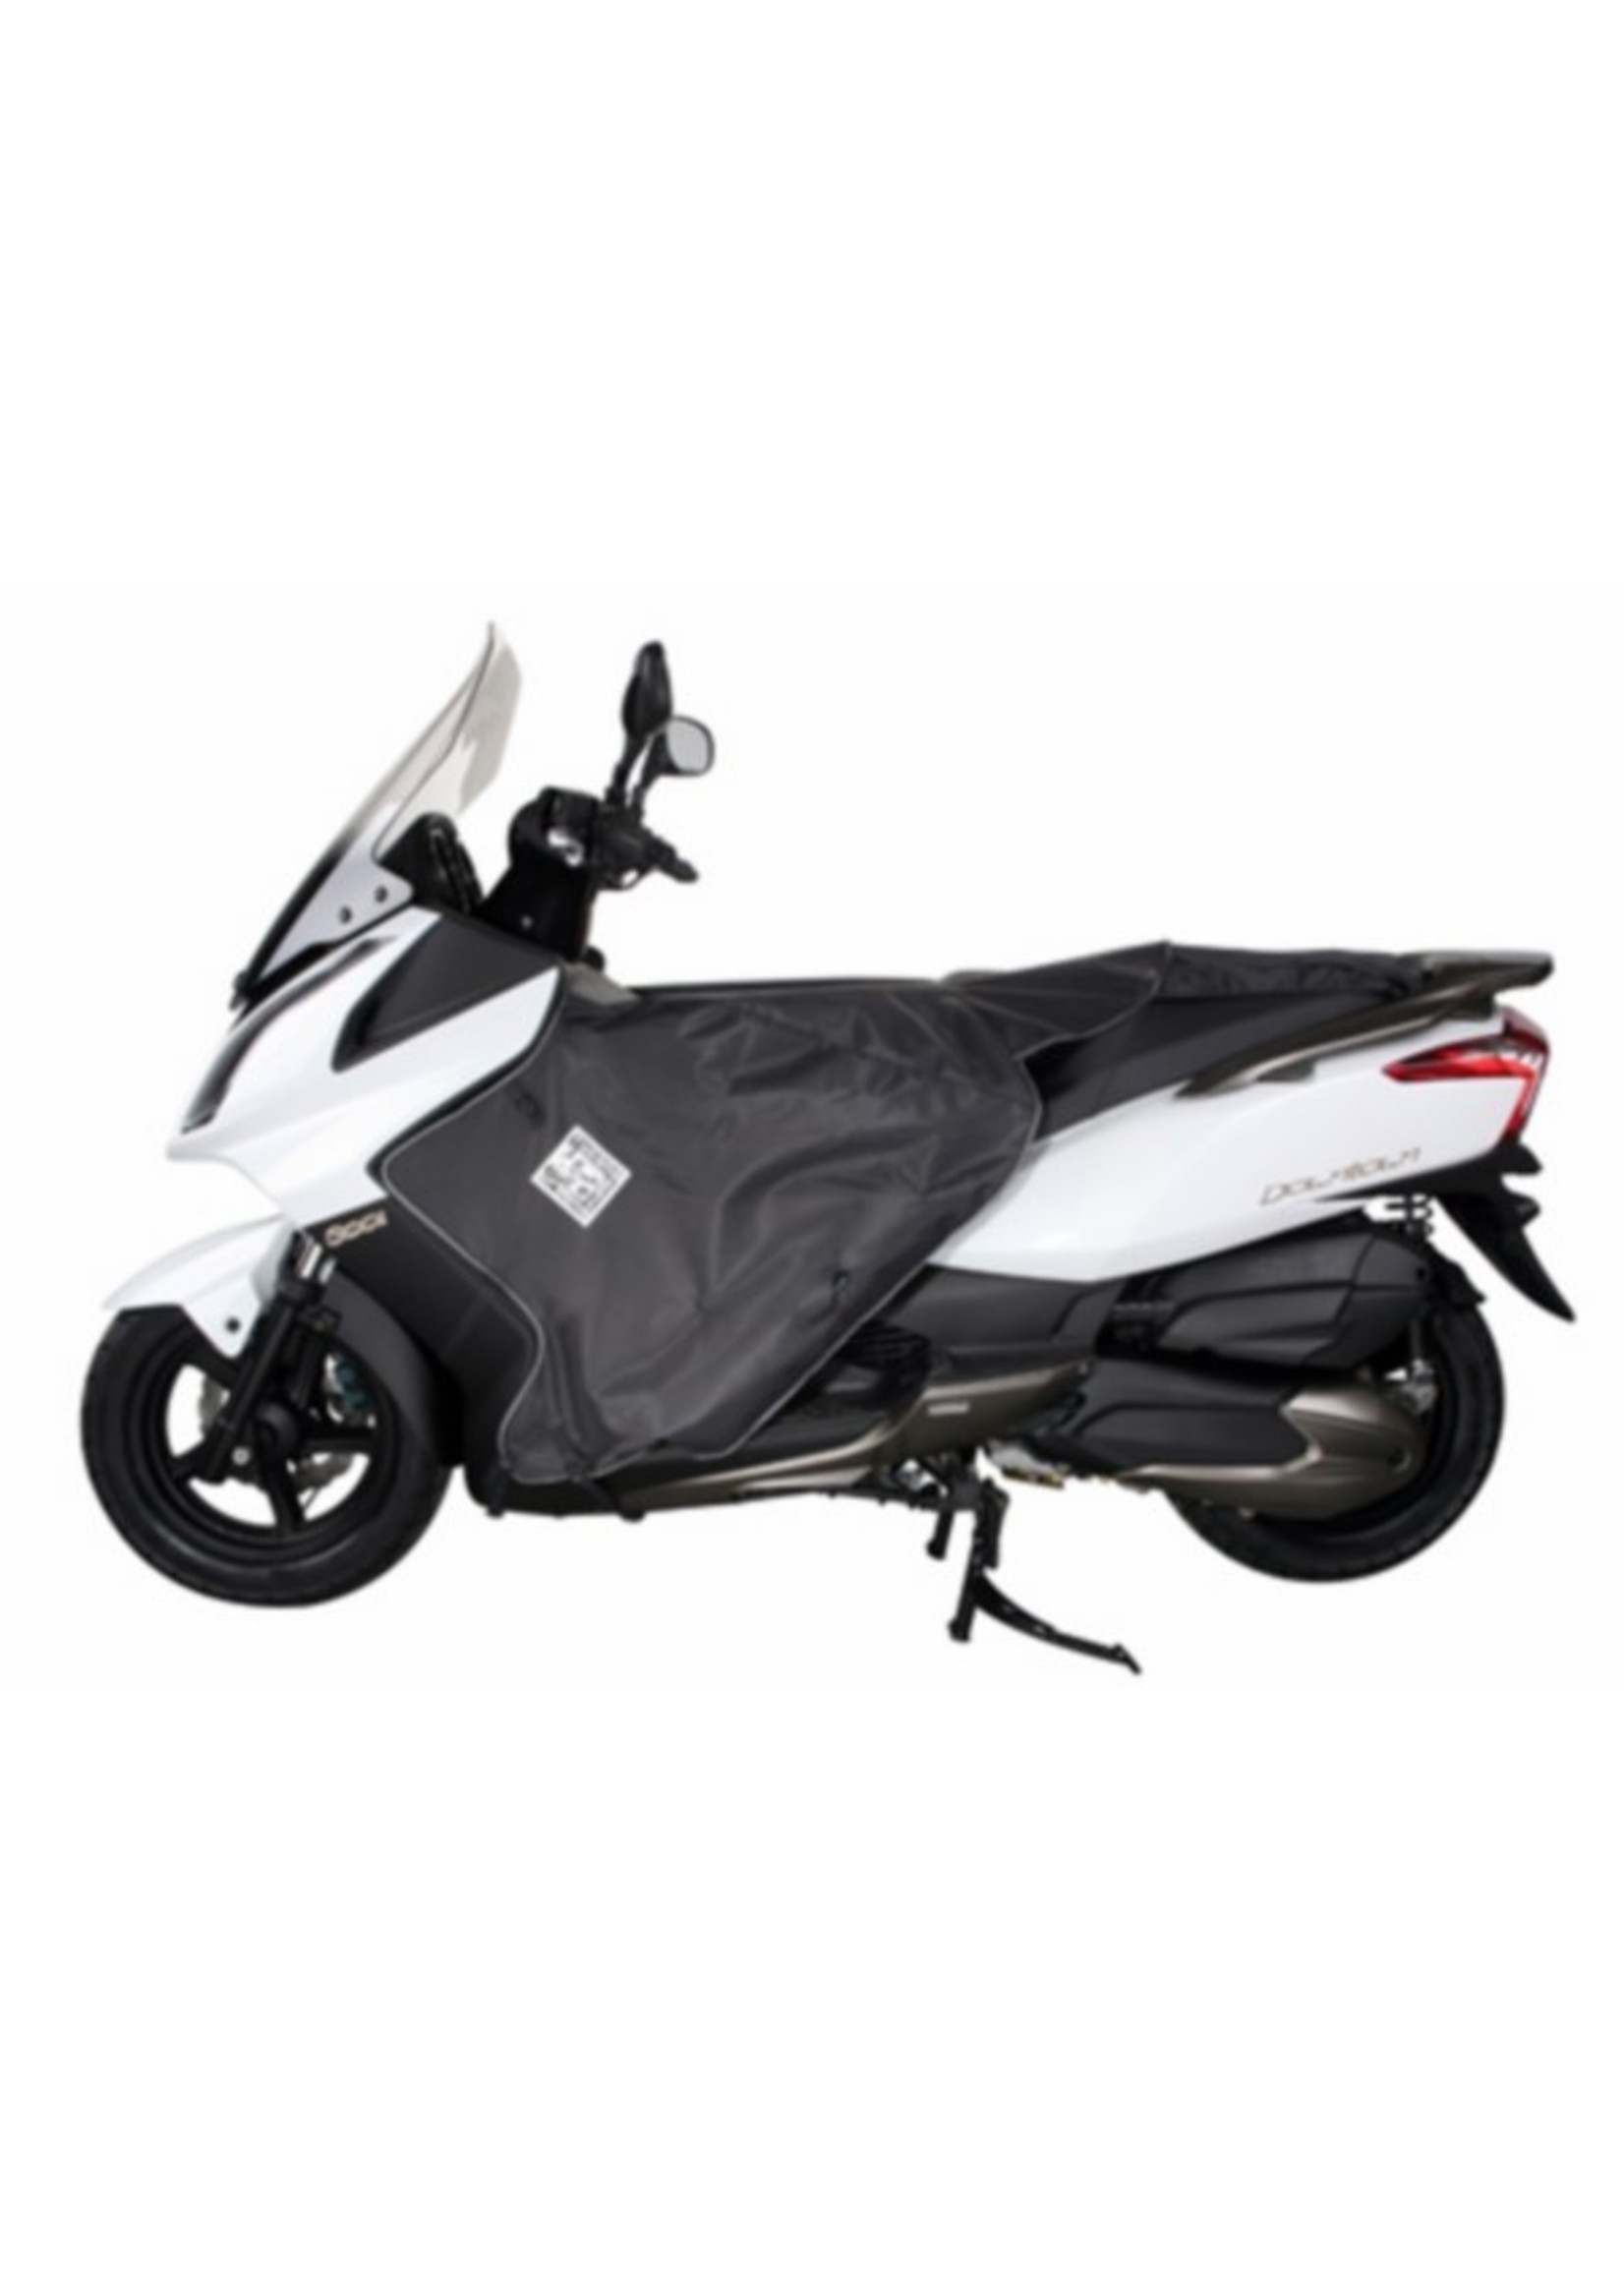 Kymco beenkleed thermoscud dink street125/200/300cc tucano r078